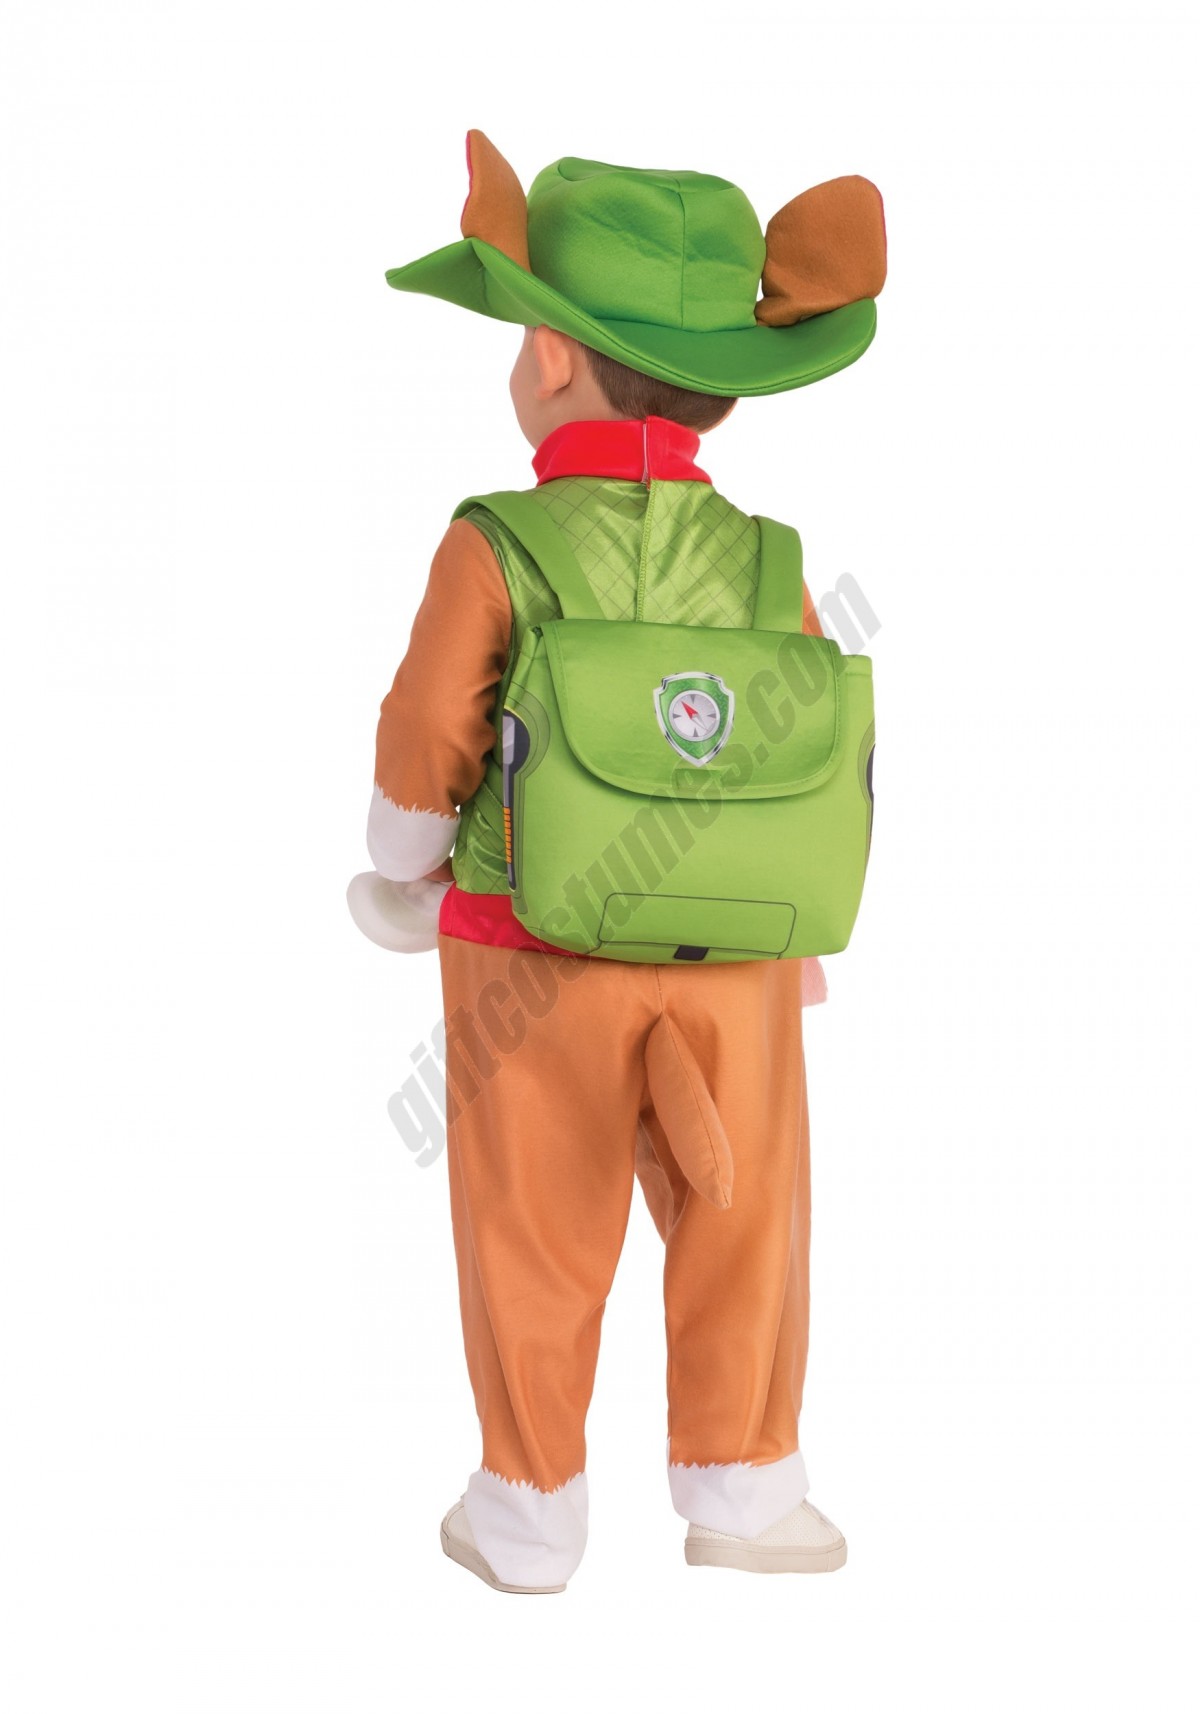 Toddler Tracker Costume from Paw Patrol Promotions - -1